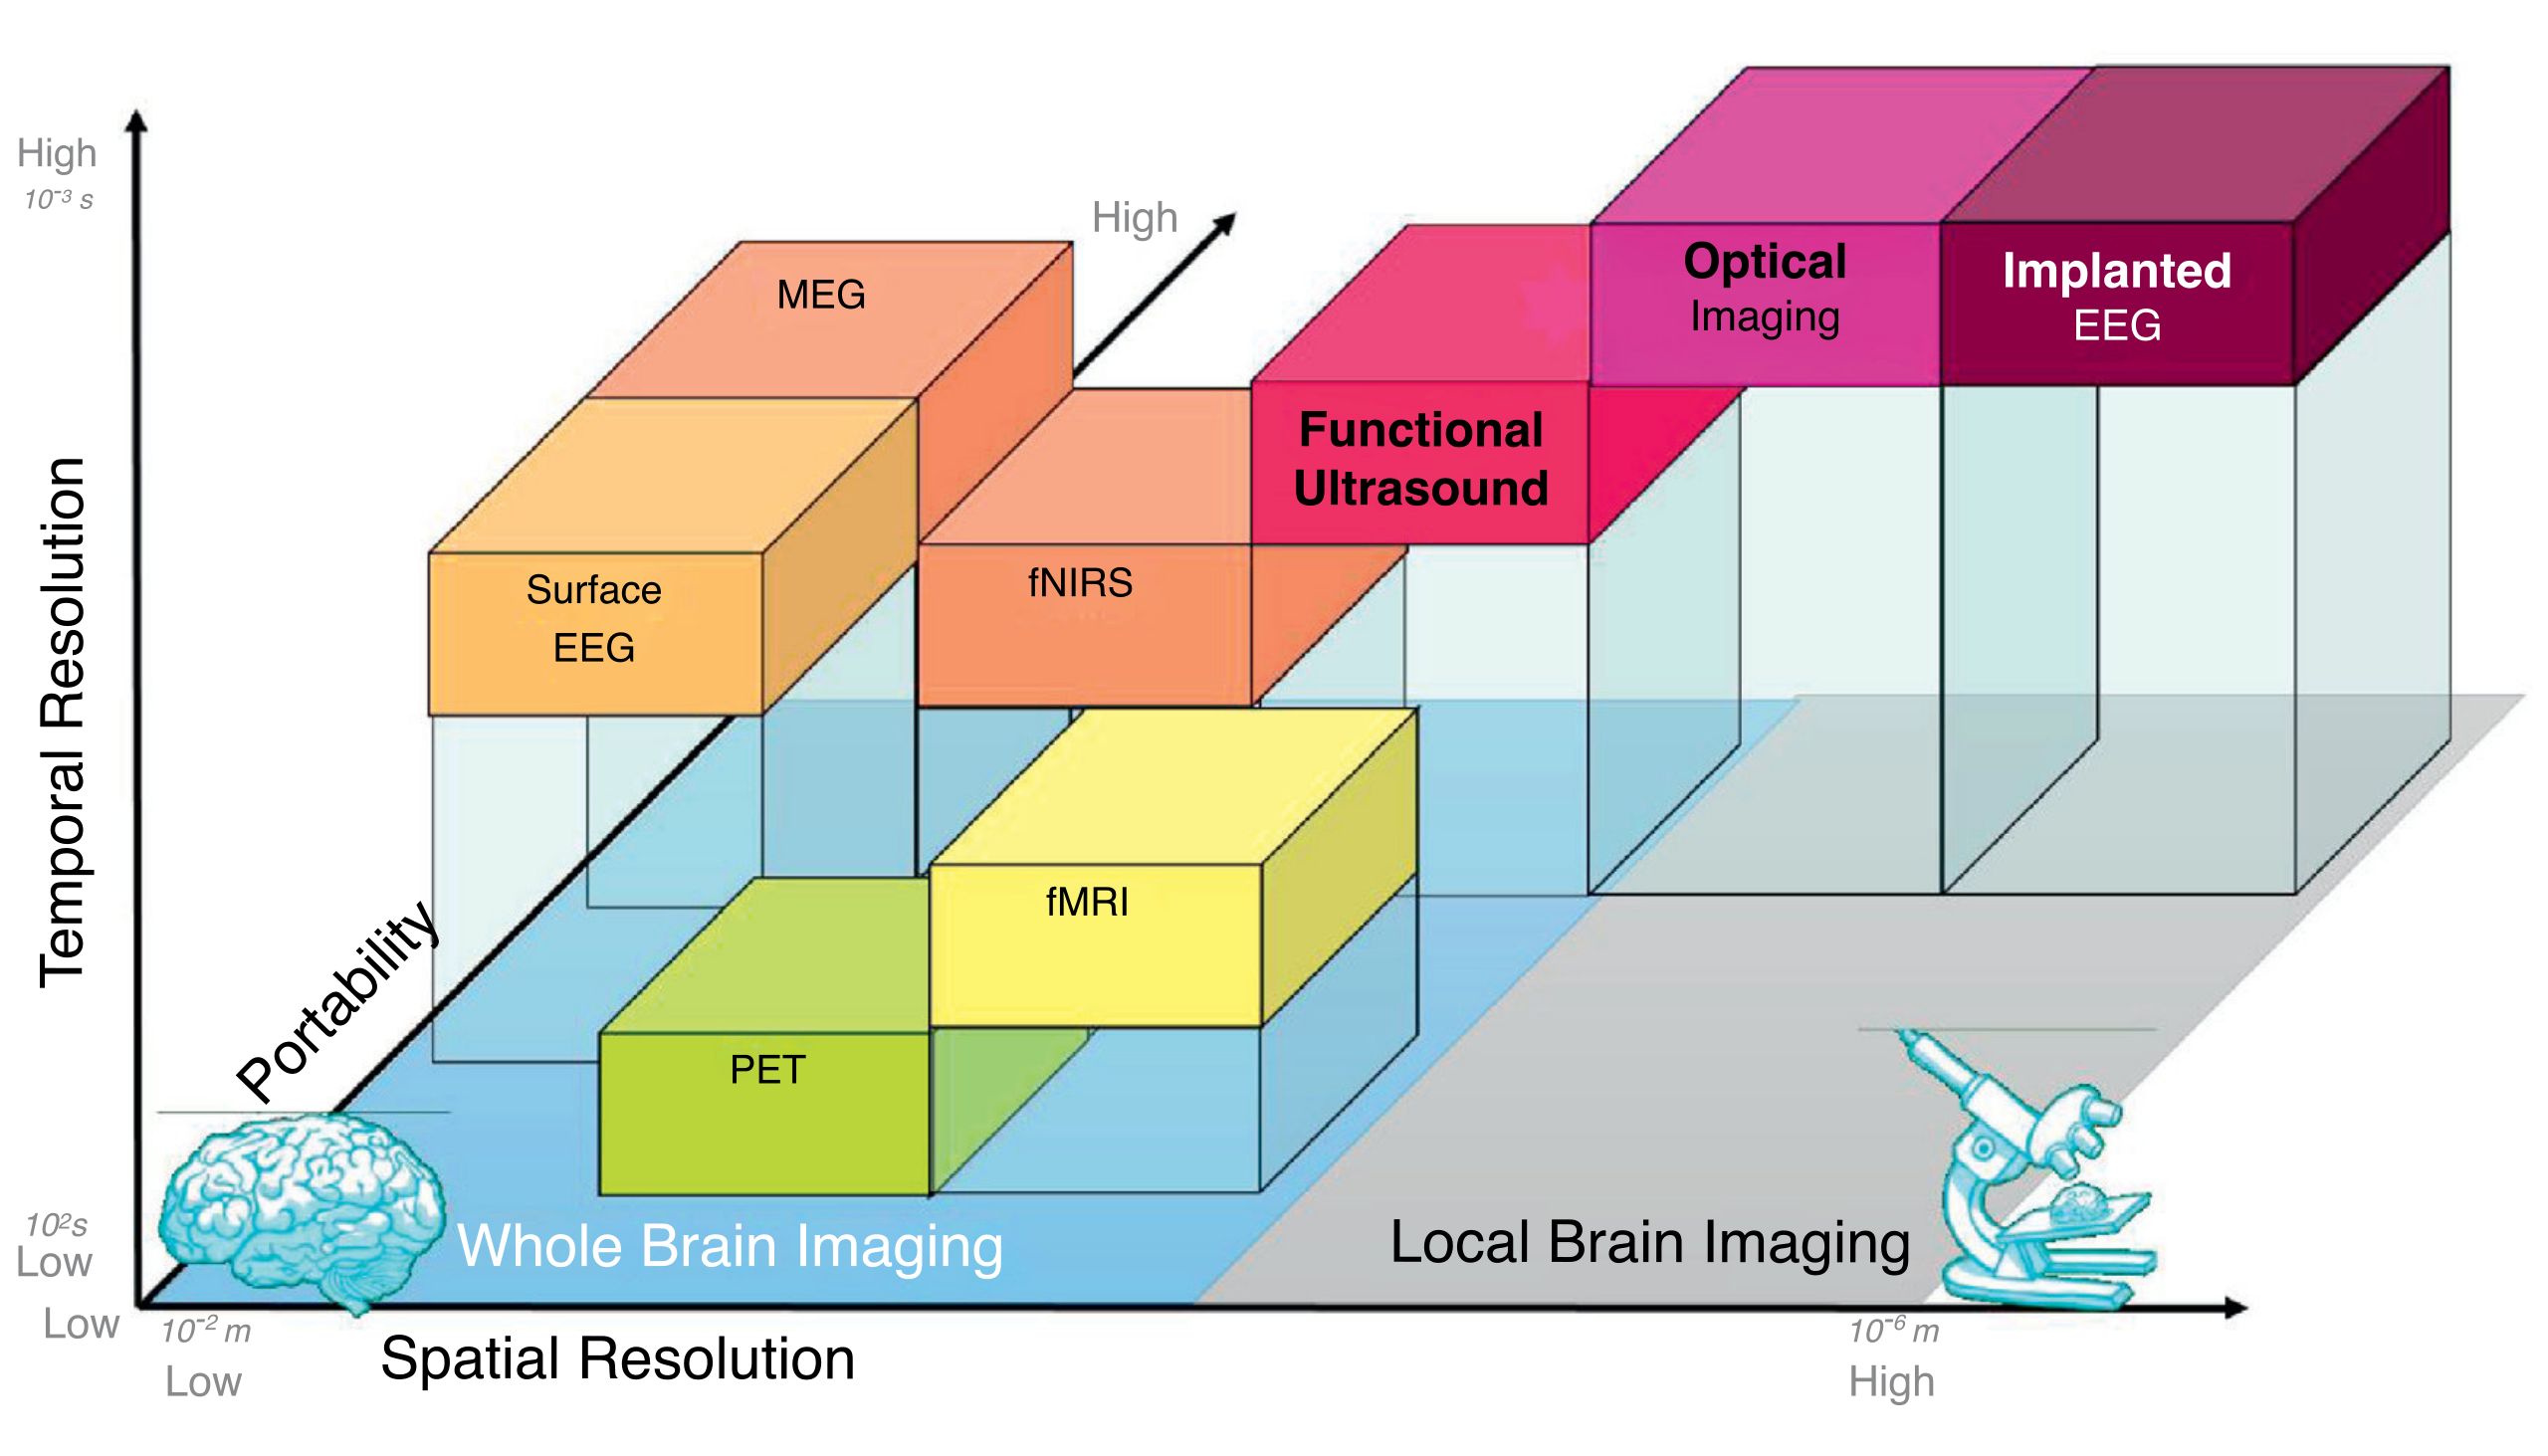 A labeled, three-dimensional graph comparing the several brain imaging techniques on the axes of Temporal Resolution, Portability, and Spatial Resolution. Image description linked to in caption